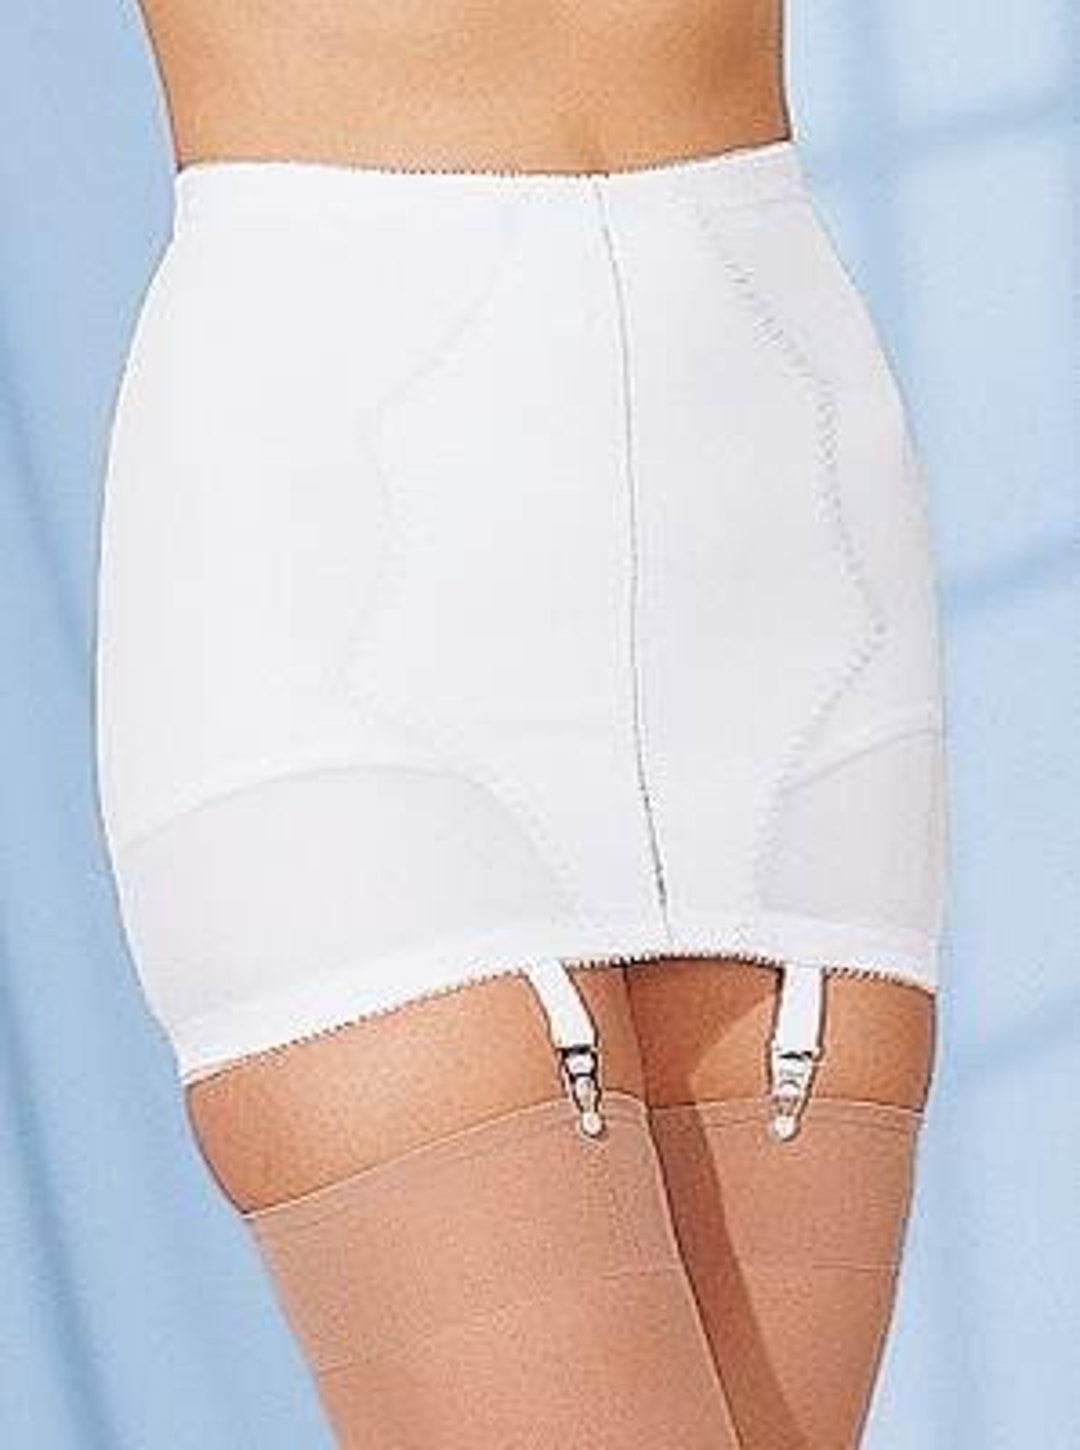 Trimflex Of California Pale Yellow And White Girdle With Garters Sz M -  clothing & accessories - by owner - apparel